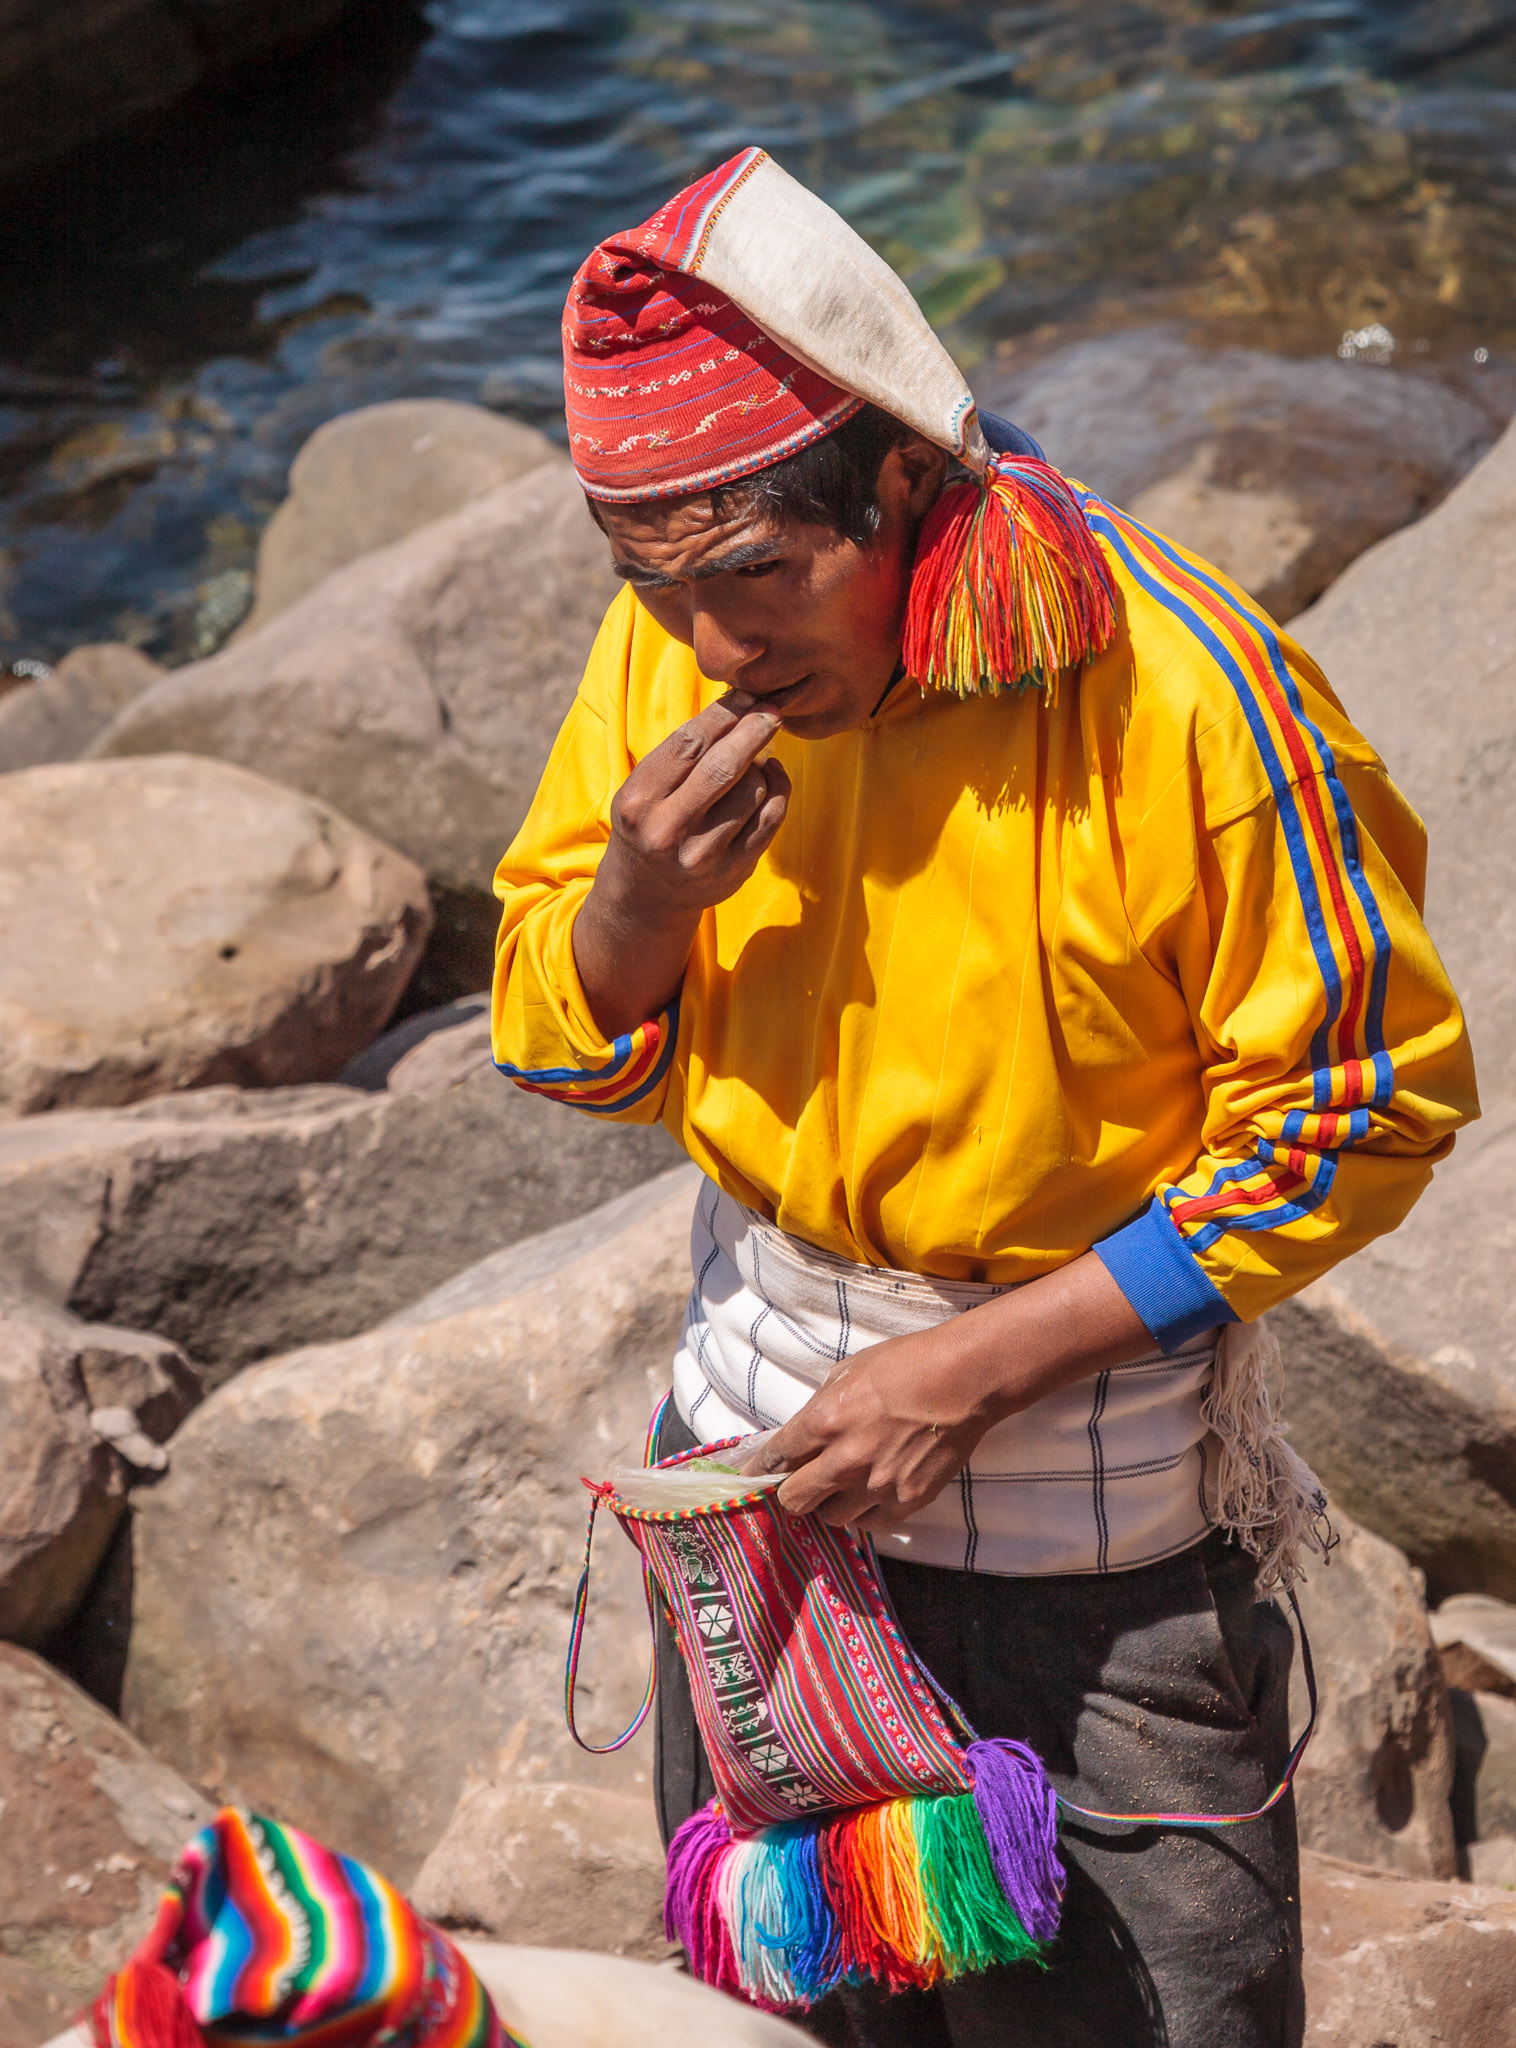 Men chewing coca leaves on Isla Taquile